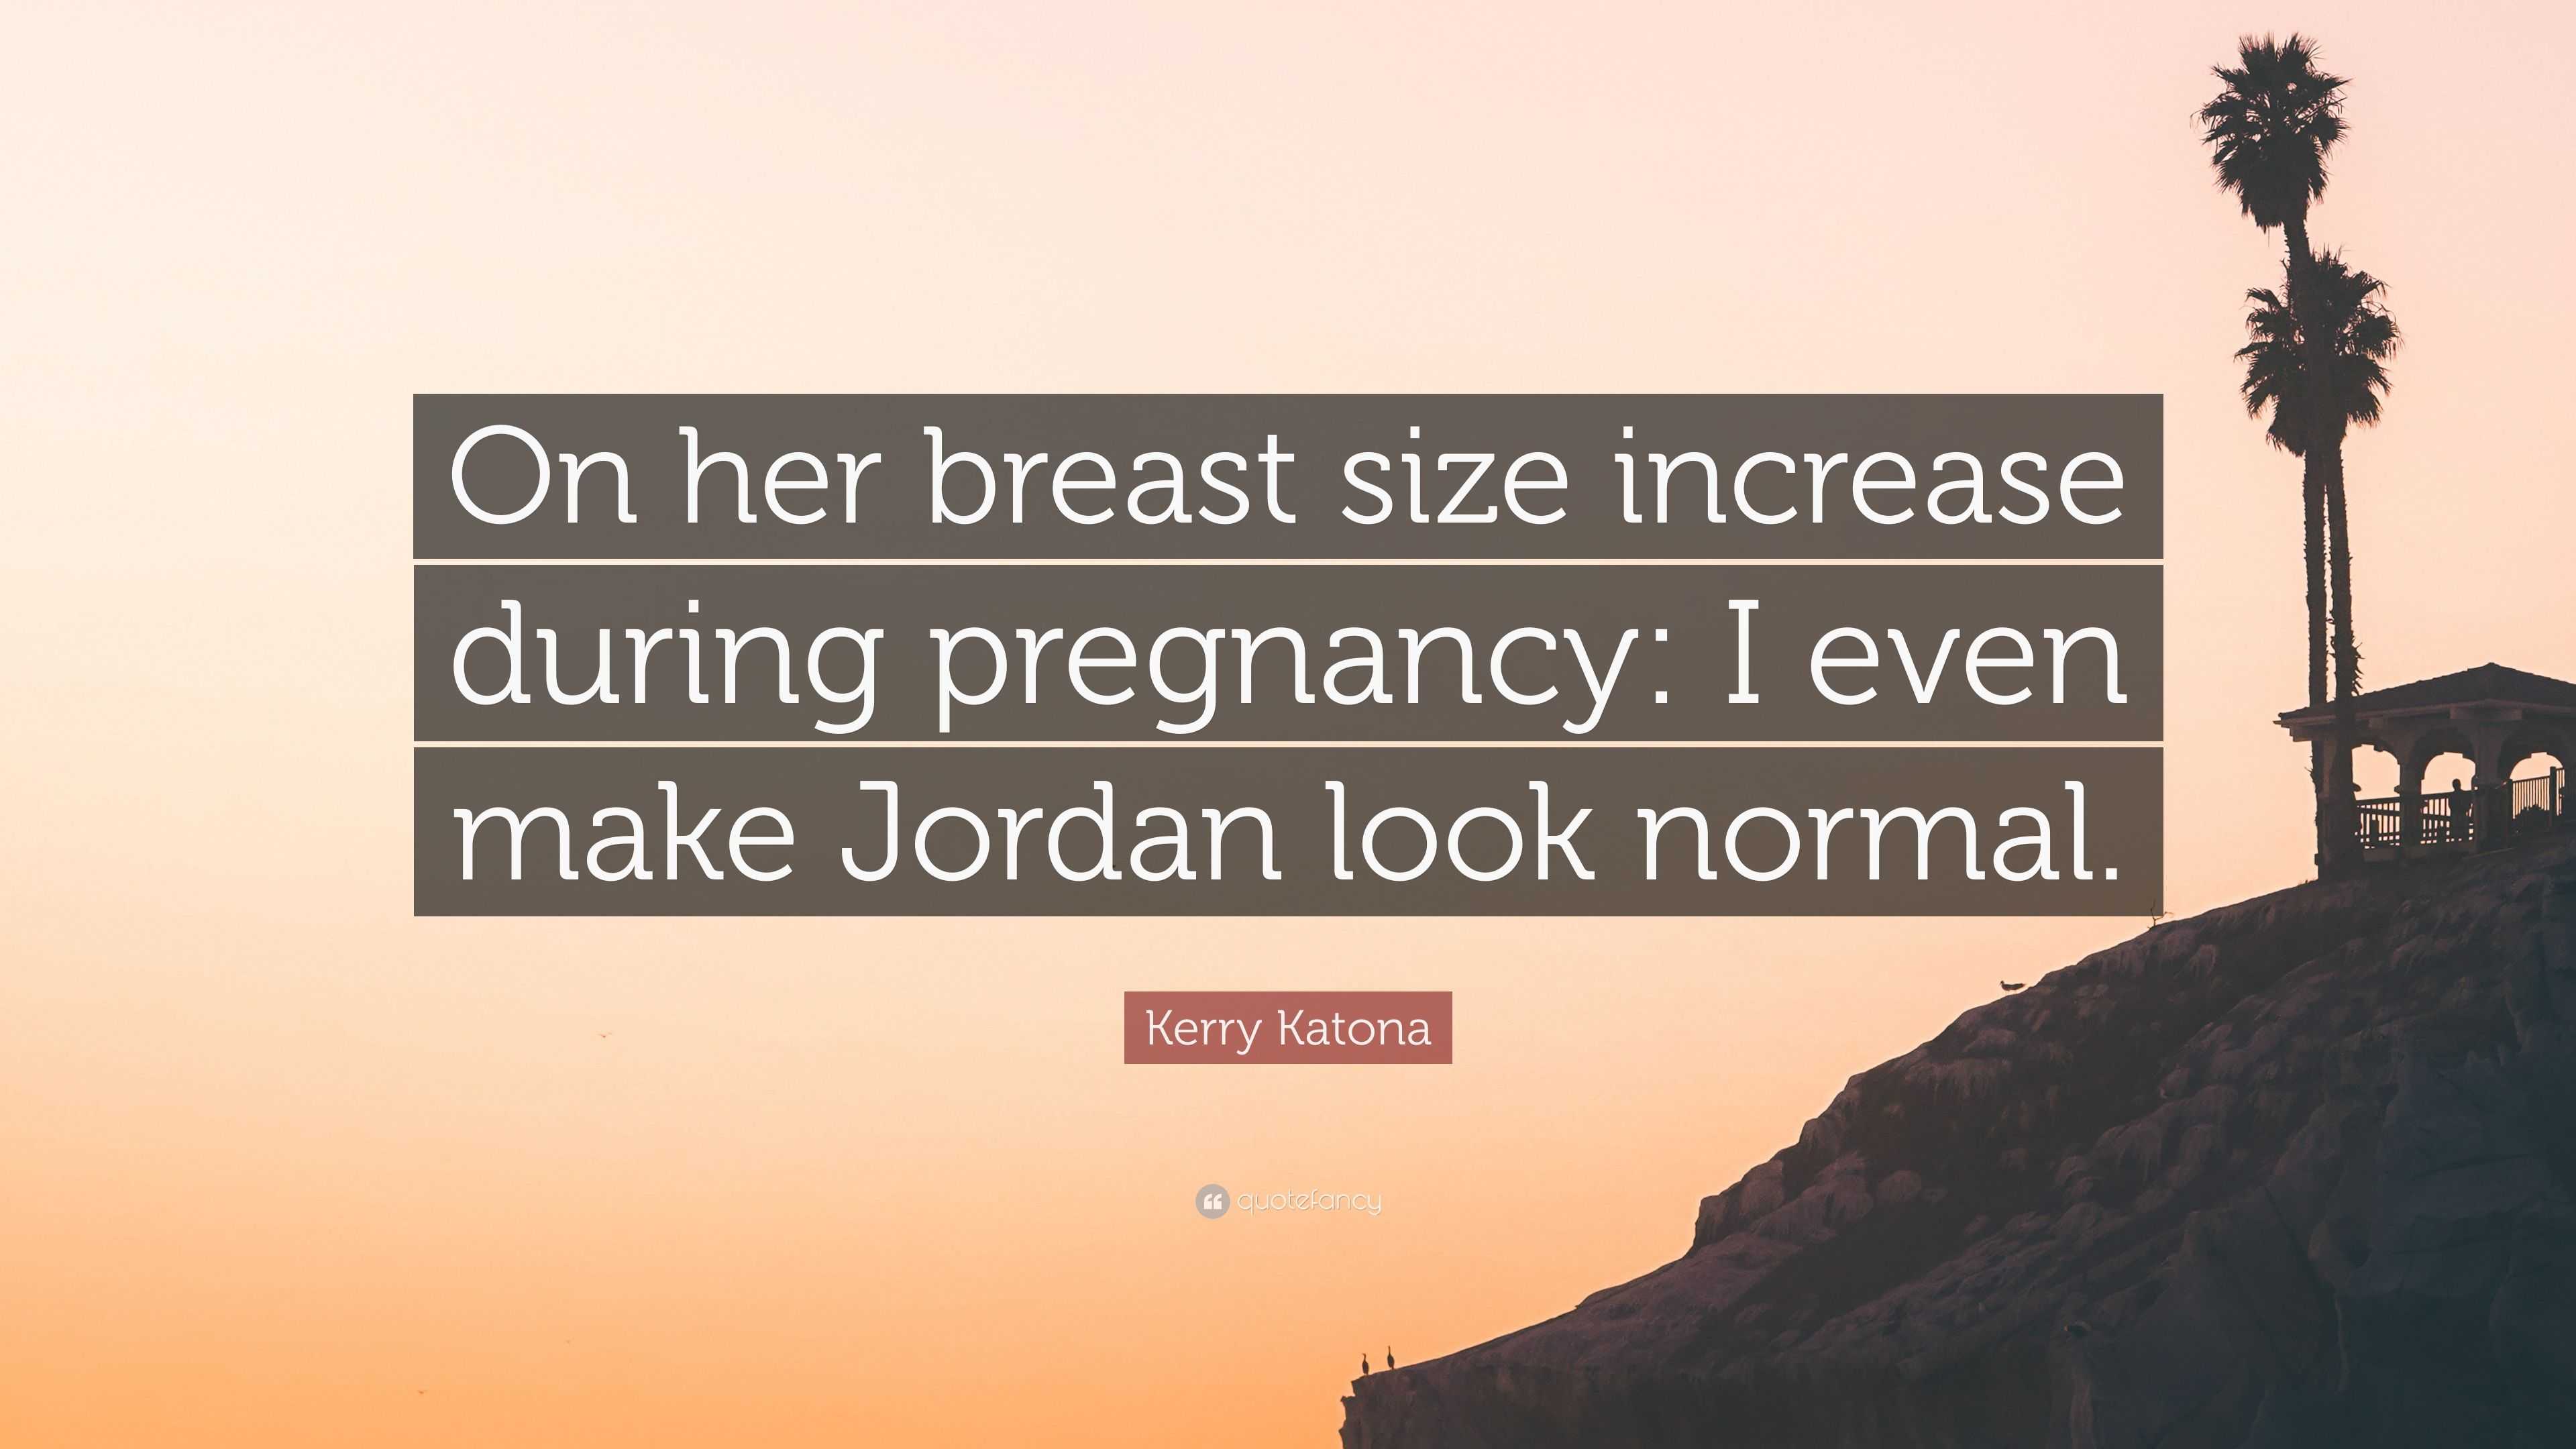 Kerry Katona Quote: “On her breast size increase during pregnancy: I even  make Jordan look normal.”